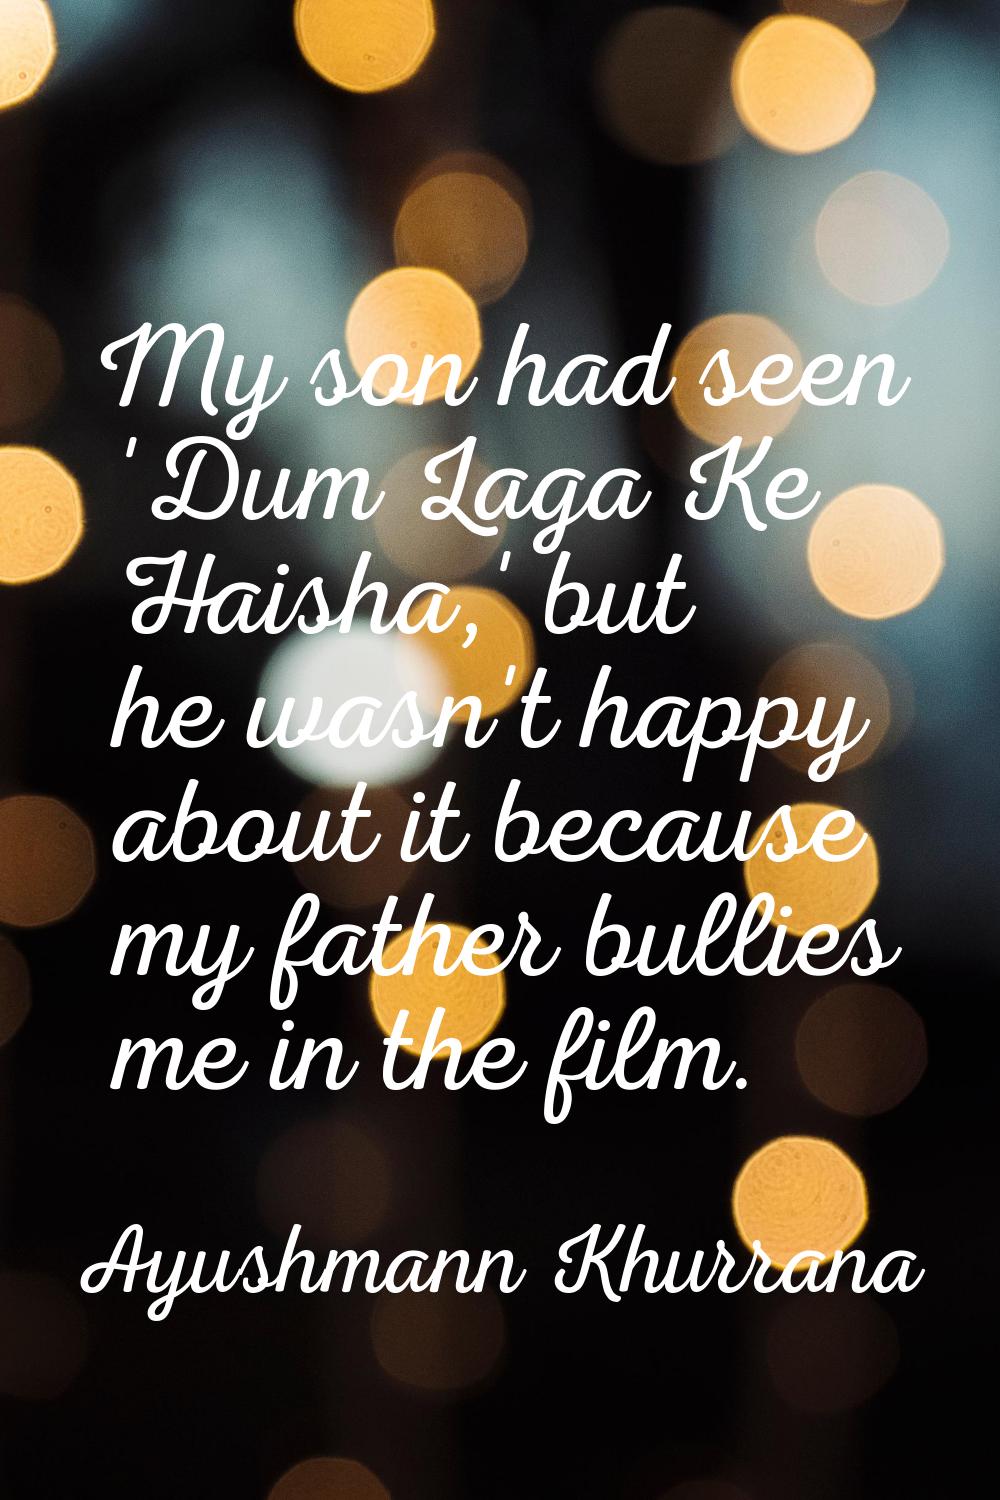 My son had seen 'Dum Laga Ke Haisha,' but he wasn't happy about it because my father bullies me in 